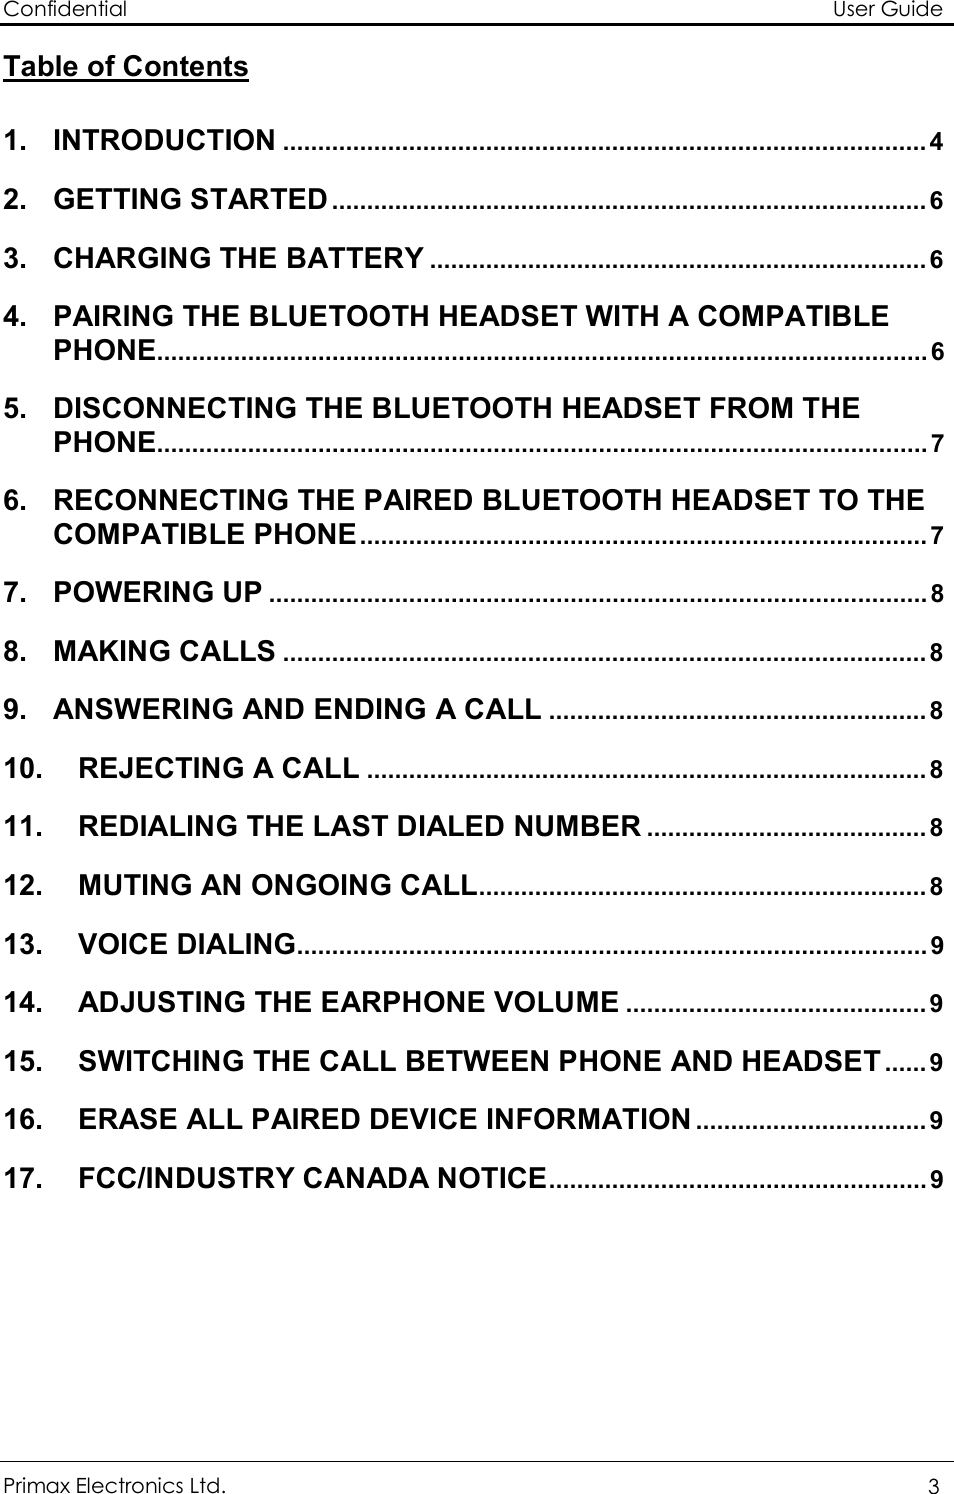 Confidential                                                                                                          User Guide Primax Electronics Ltd.  3  Table of Contents  1. INTRODUCTION ............................................................................................4 2. GETTING STARTED .....................................................................................6 3. CHARGING THE BATTERY .......................................................................6 4. PAIRING THE BLUETOOTH HEADSET WITH A COMPATIBLE PHONE..............................................................................................................6 5. DISCONNECTING THE BLUETOOTH HEADSET FROM THE PHONE..............................................................................................................7 6. RECONNECTING THE PAIRED BLUETOOTH HEADSET TO THE COMPATIBLE PHONE.................................................................................7 7. POWERING UP ..............................................................................................8 8. MAKING CALLS ............................................................................................8 9. ANSWERING AND ENDING A CALL ......................................................8 10. REJECTING A CALL ................................................................................8 11. REDIALING THE LAST DIALED NUMBER ........................................8 12. MUTING AN ONGOING CALL................................................................8 13. VOICE DIALING..........................................................................................9 14. ADJUSTING THE EARPHONE VOLUME ...........................................9 15. SWITCHING THE CALL BETWEEN PHONE AND HEADSET......9 16. ERASE ALL PAIRED DEVICE INFORMATION .................................9 17. FCC/INDUSTRY CANADA NOTICE......................................................9        